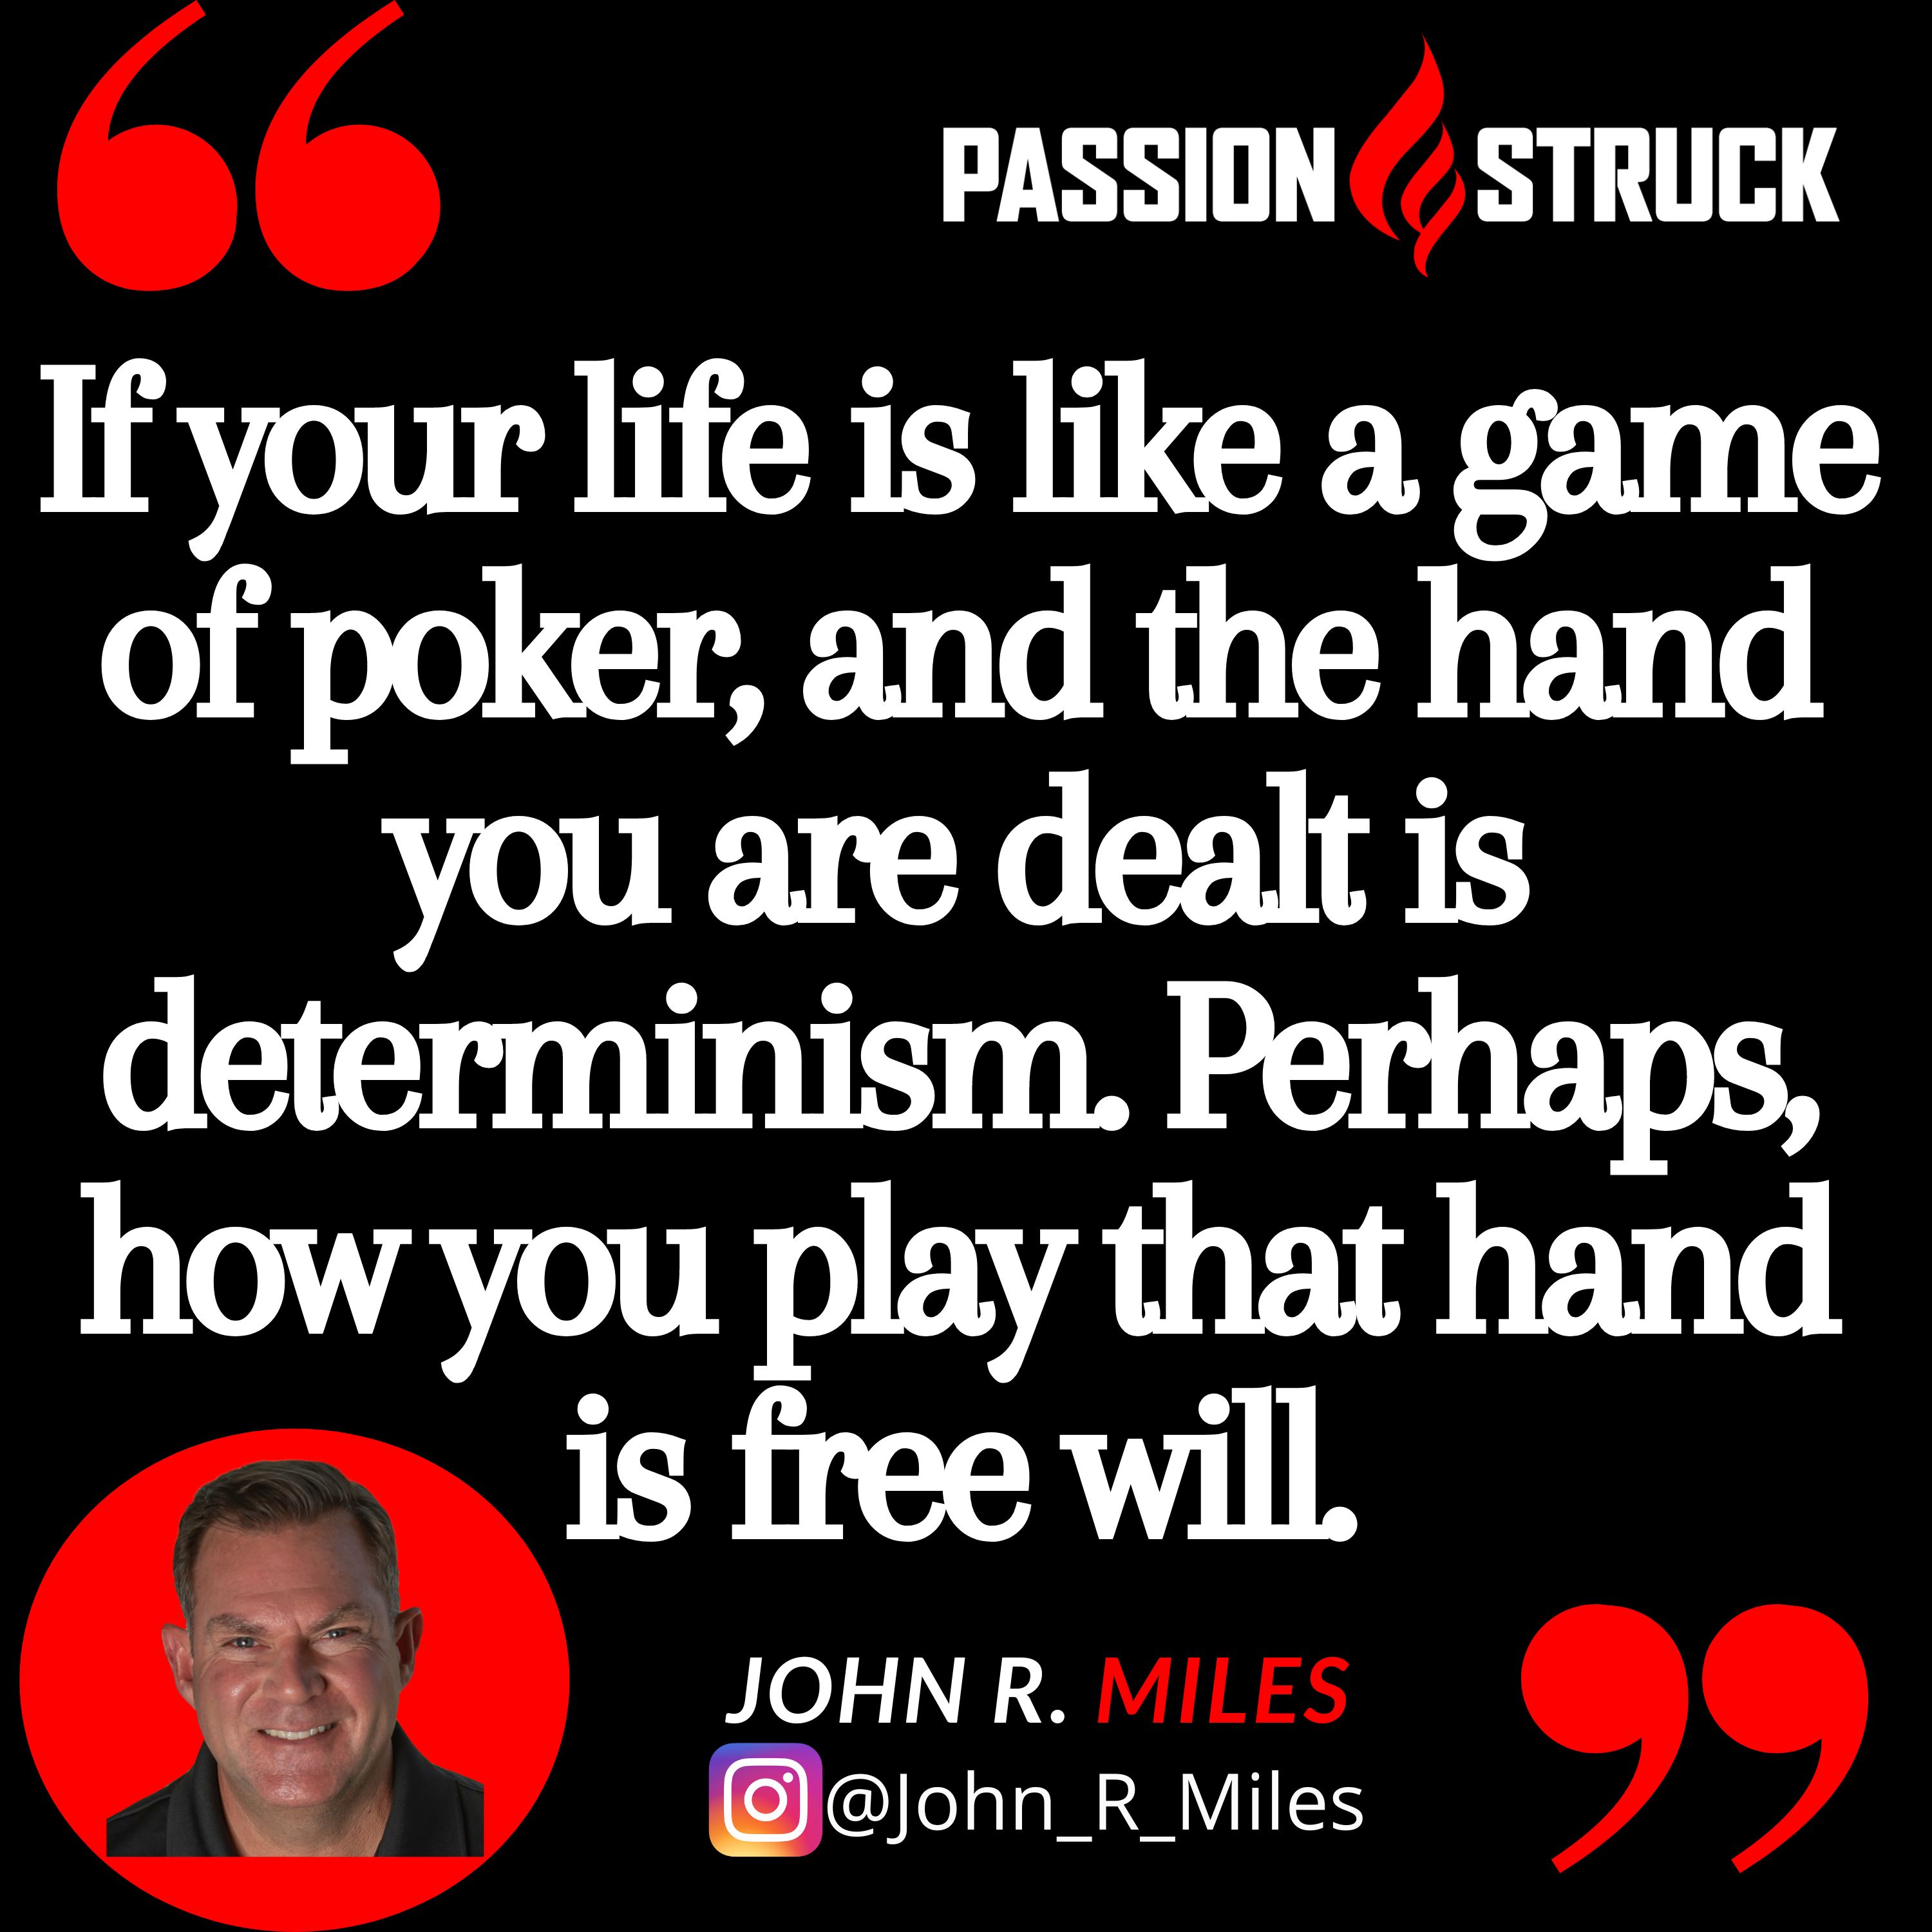 John R. Miles quote from the Passion Struck podcast: "If your life is like a game of poker, and the hand you are dealt is determinism. Perhaps, how you play that hand is free will."